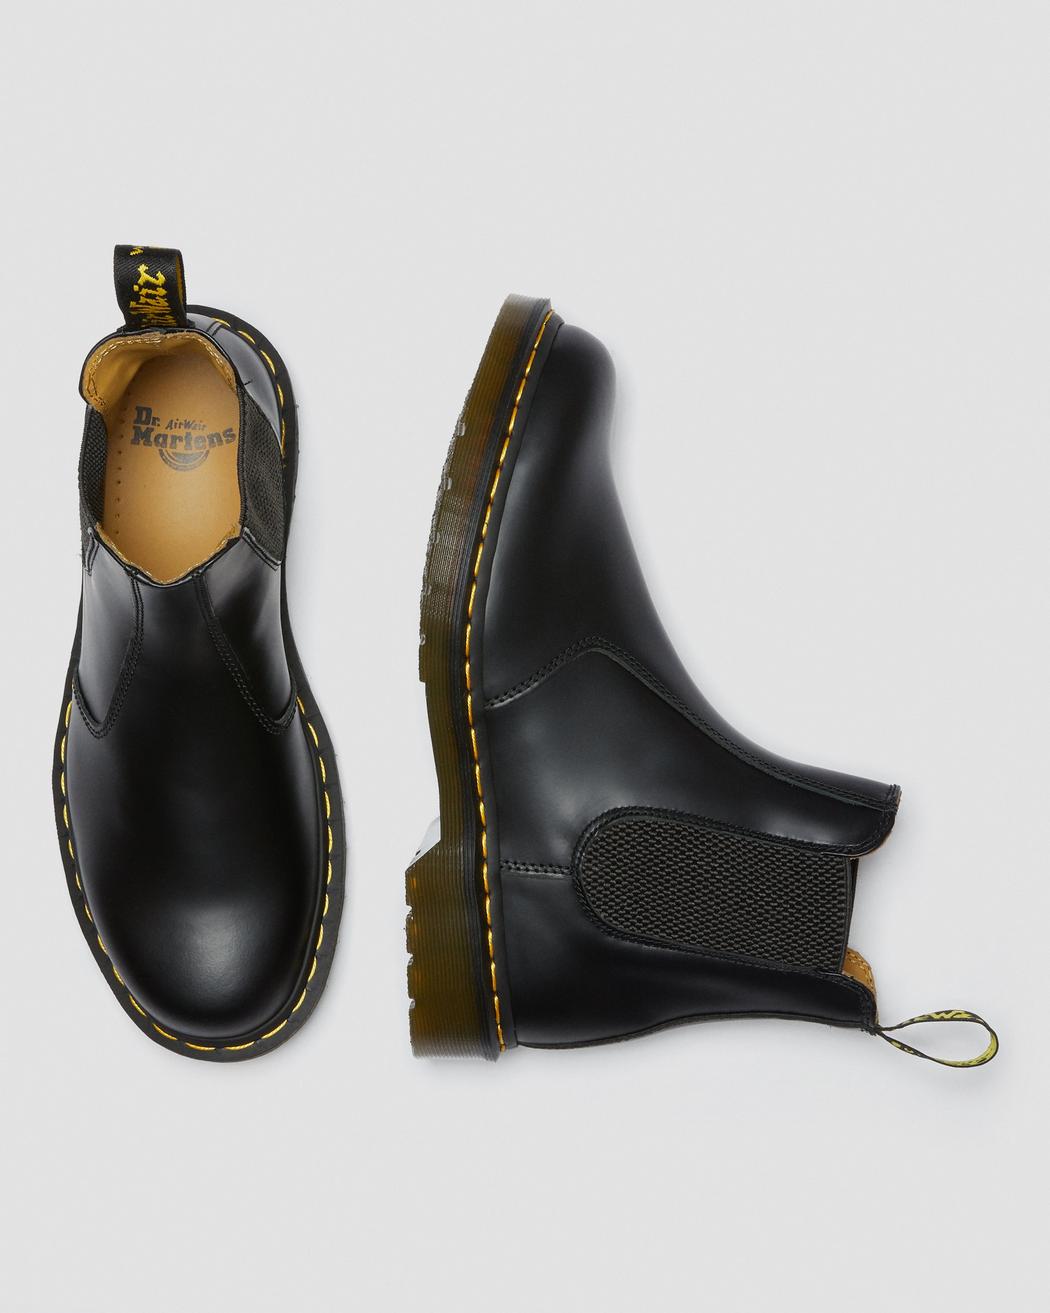 2976 Yellow Stitch Smooth Leather Chelsea Boots - Black Vintage